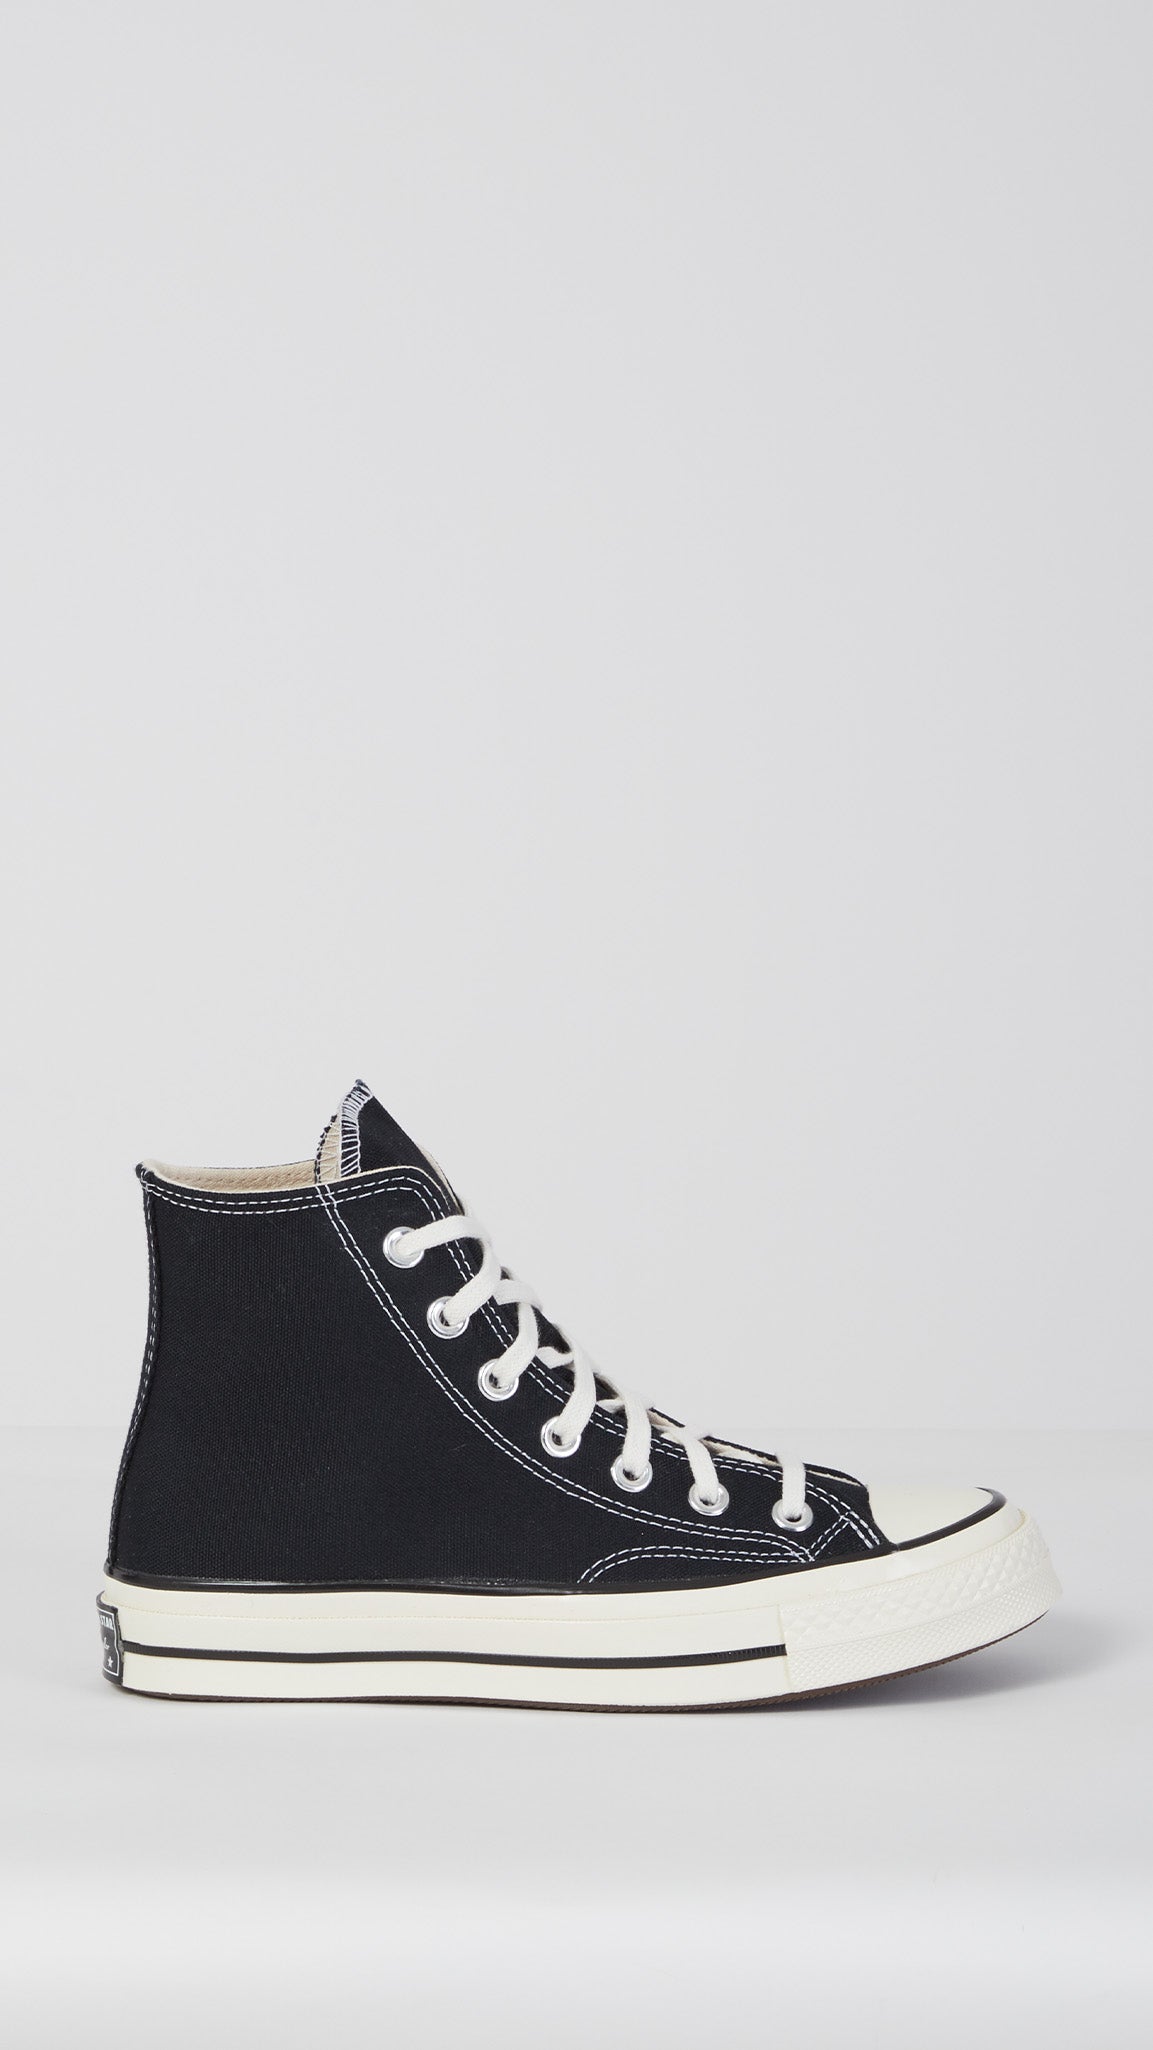 Converse: Black Chuck 70 Classic High Top | Shoes - Sneakers